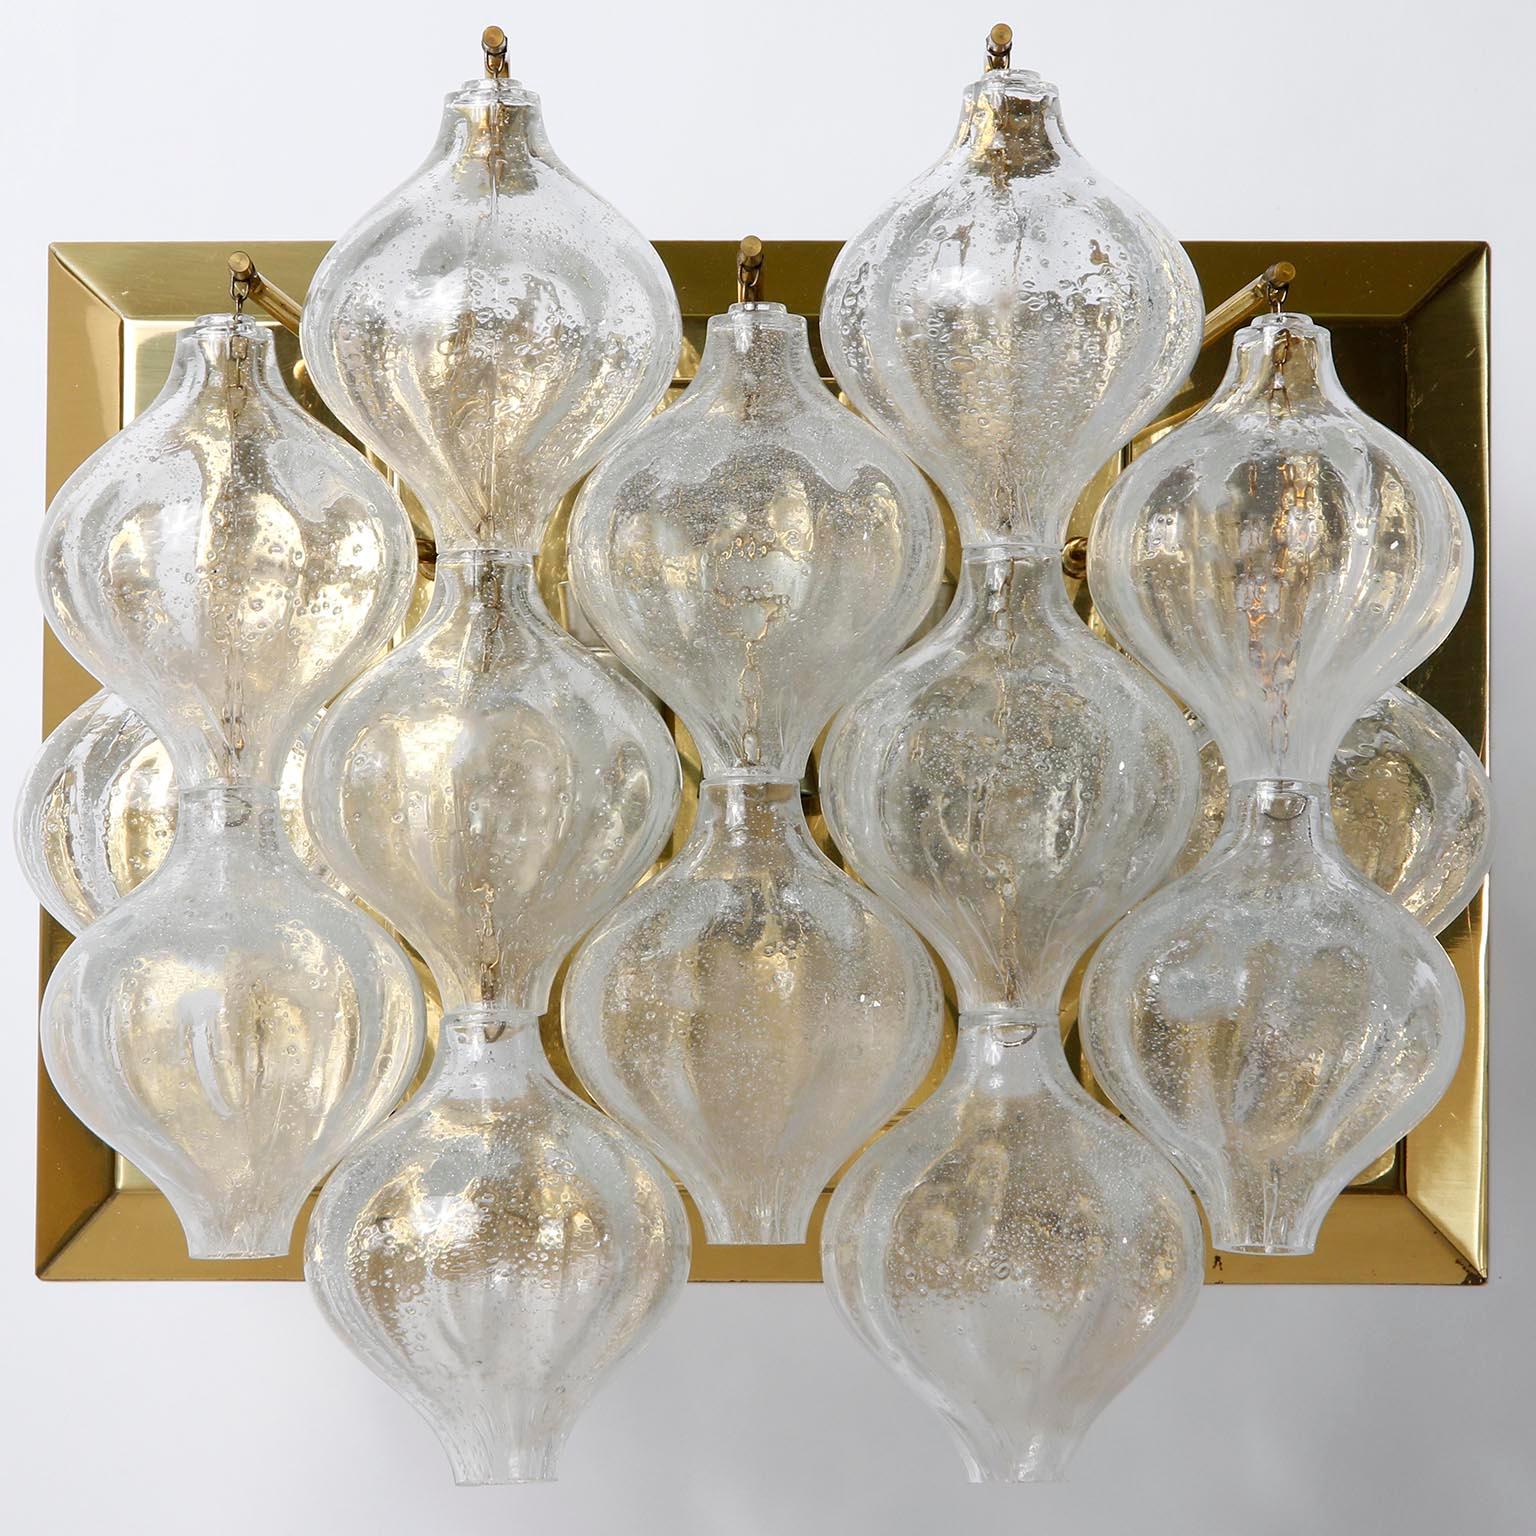 A pair of large 'Tulipan' brass and glass wall light fixtures by J.T. Kalmar, Austria, Vienna, manufactured in midcentury, circa 1970 (late 1960s or early 1970s).
The name Tulipan derives from the tulip shaped hand-blown clear Murano glass pieces.